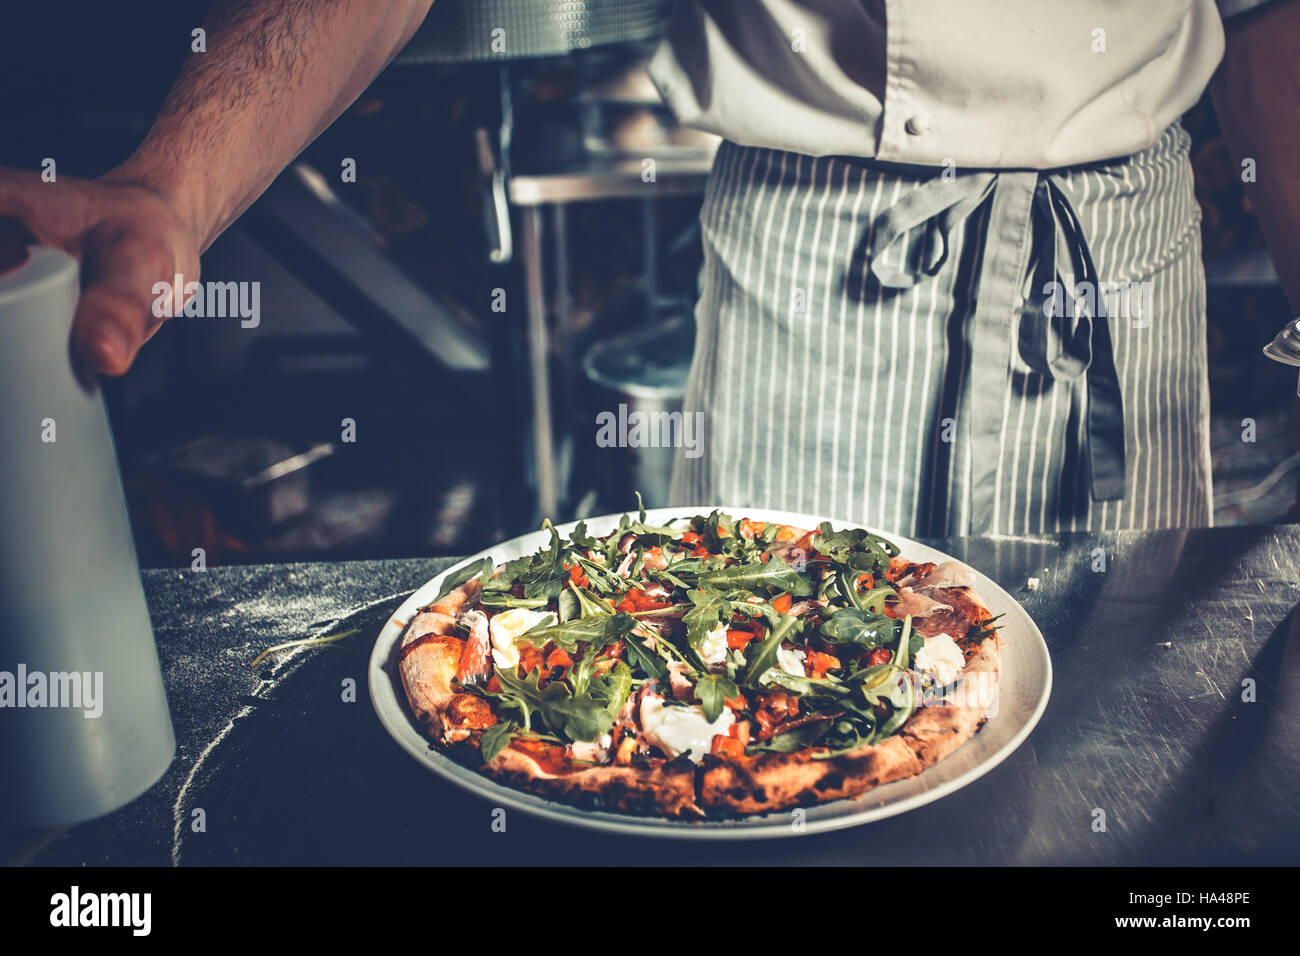 Chef cooking gourmet pizza Stock Photo